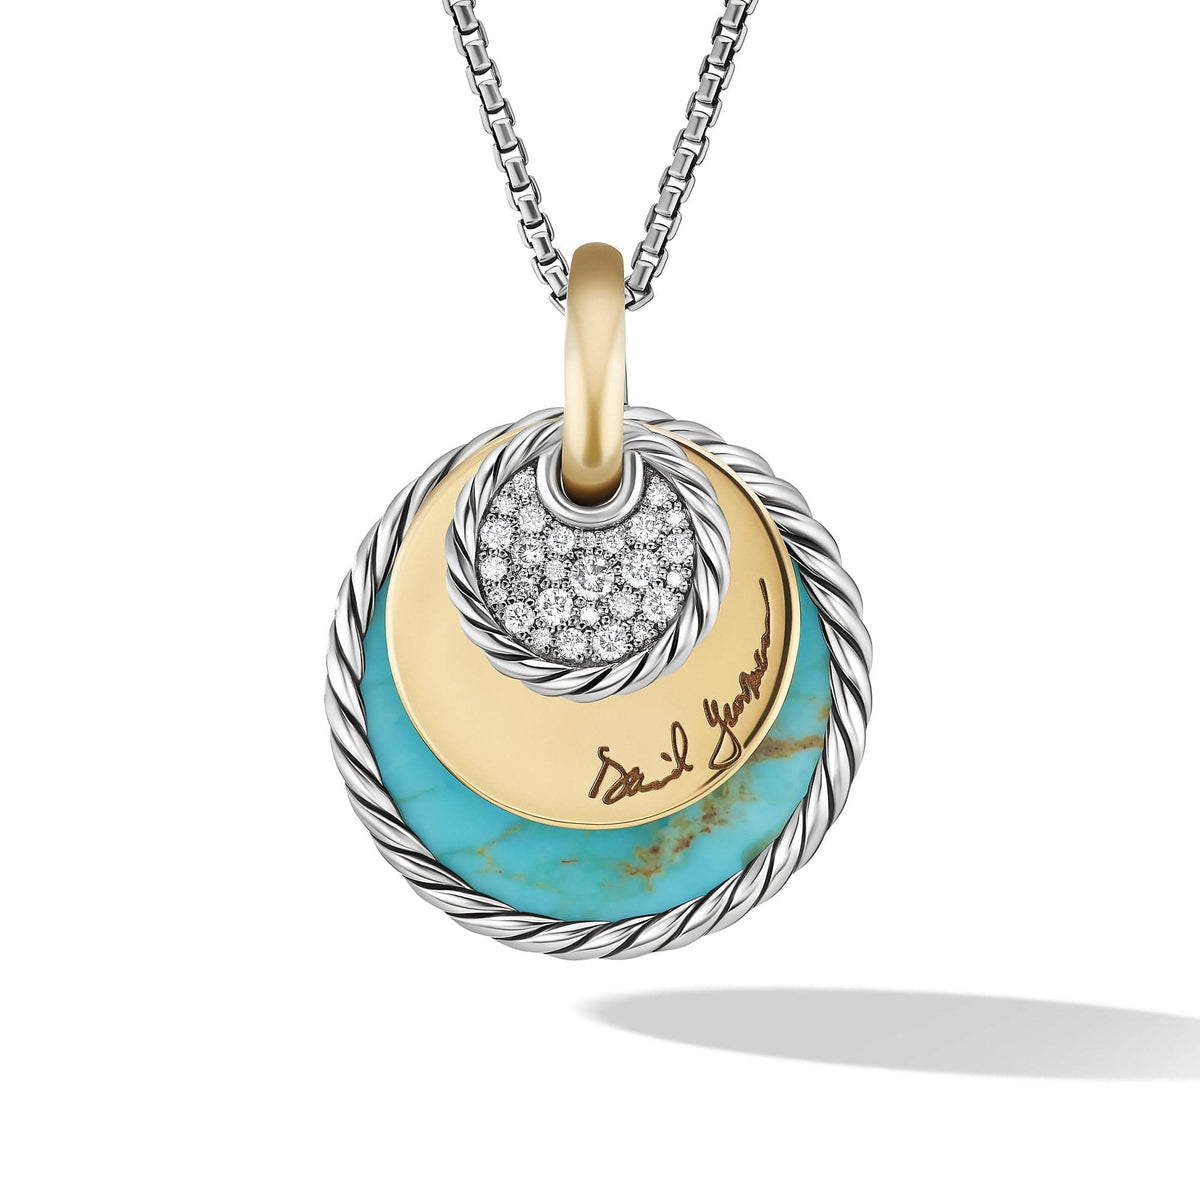 DY Elements® Eclipse Pendant Necklace with Turquoise Reversible to Green Onyx, 18K Yellow Gold and Pavé Diamonds